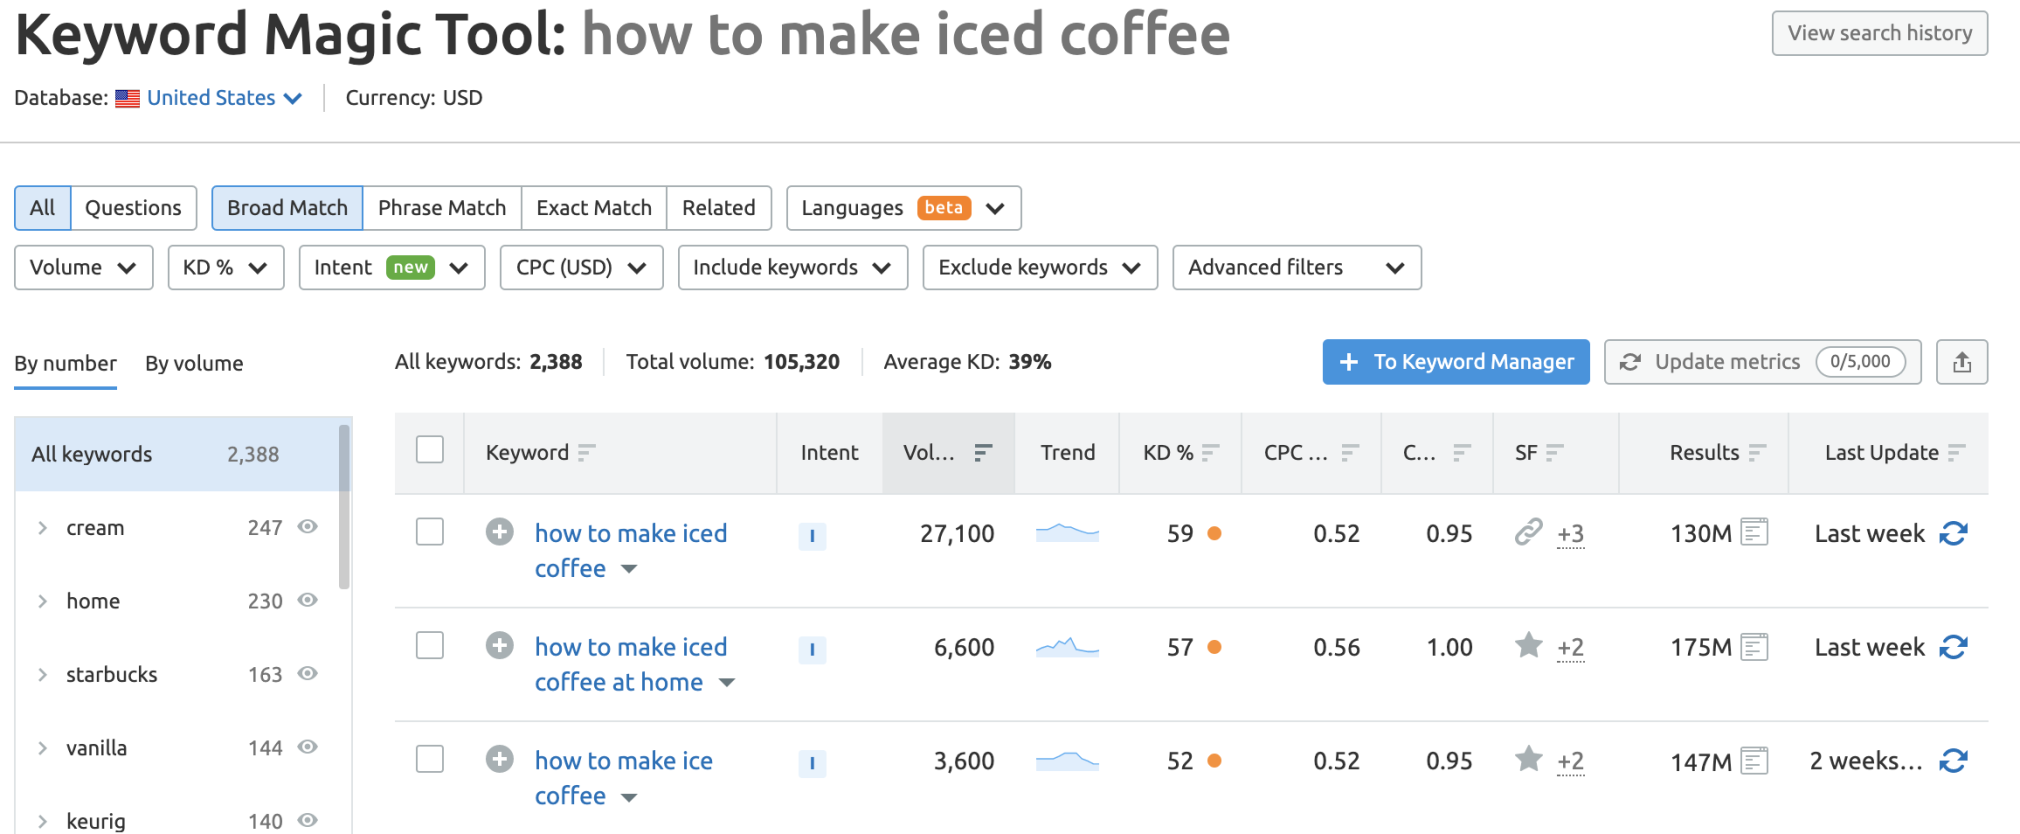 How to make iced coffee Keyword Magic Tool results